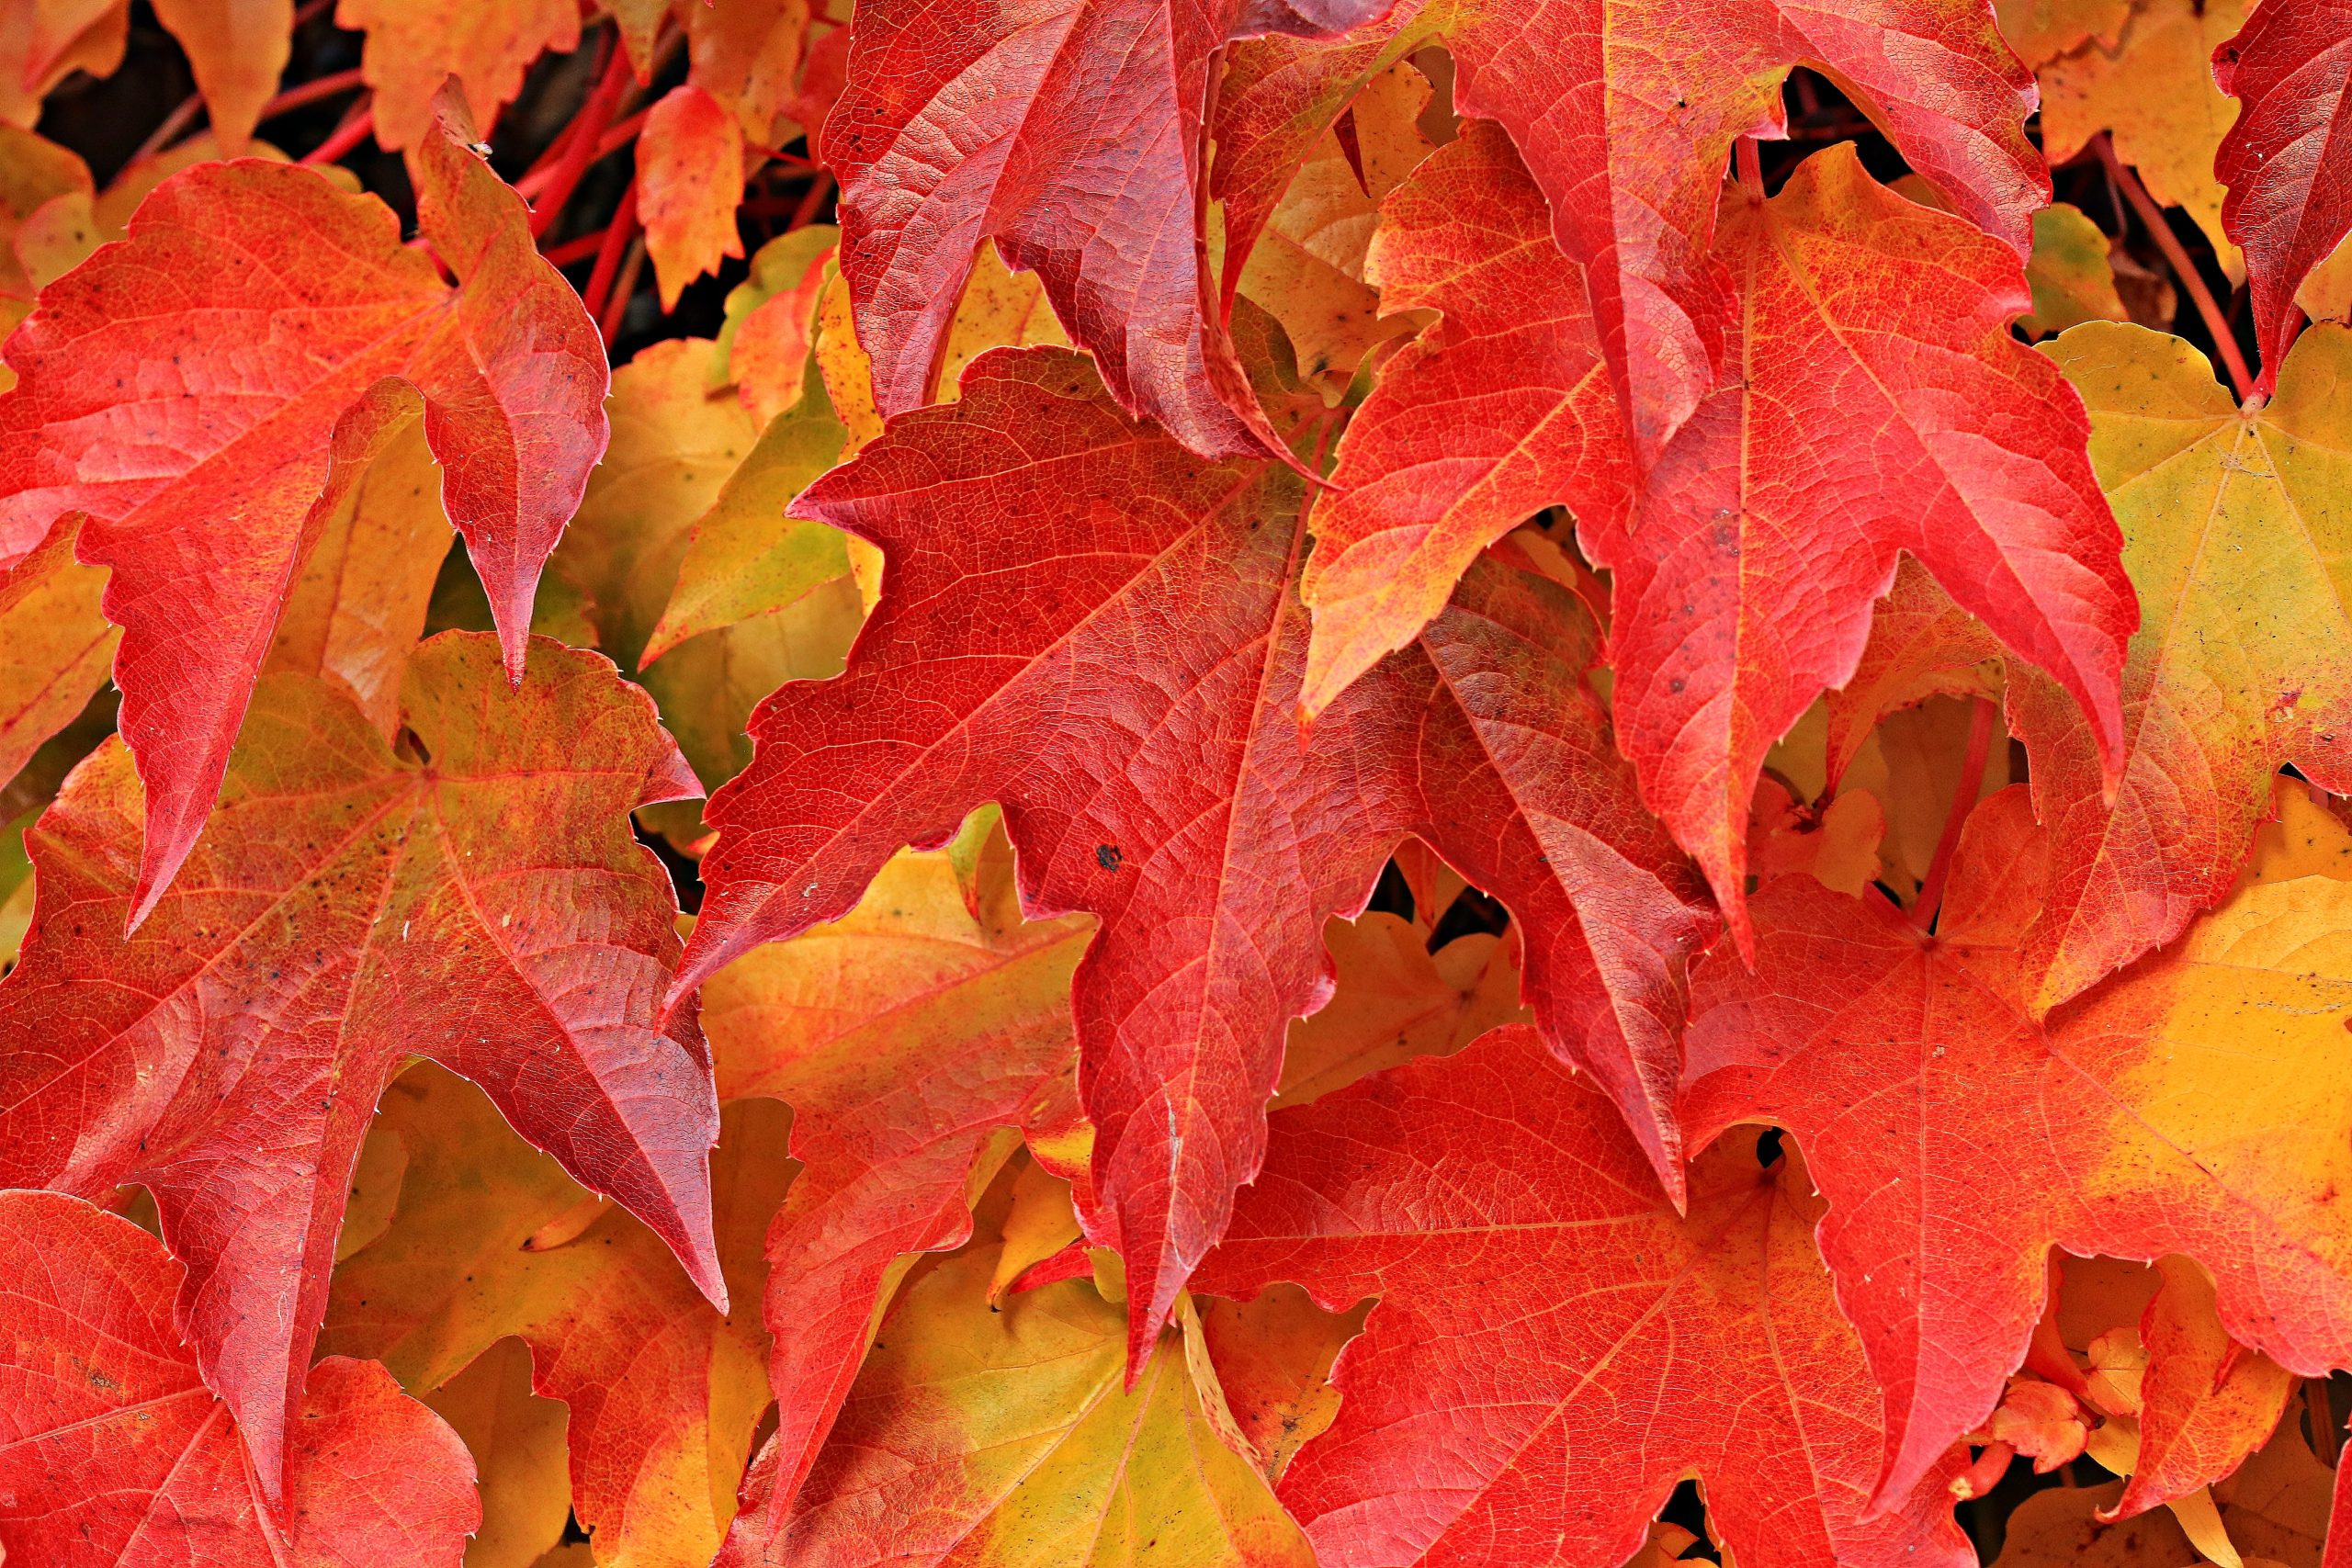 Many orange and yellow leaves. This image represents fall.